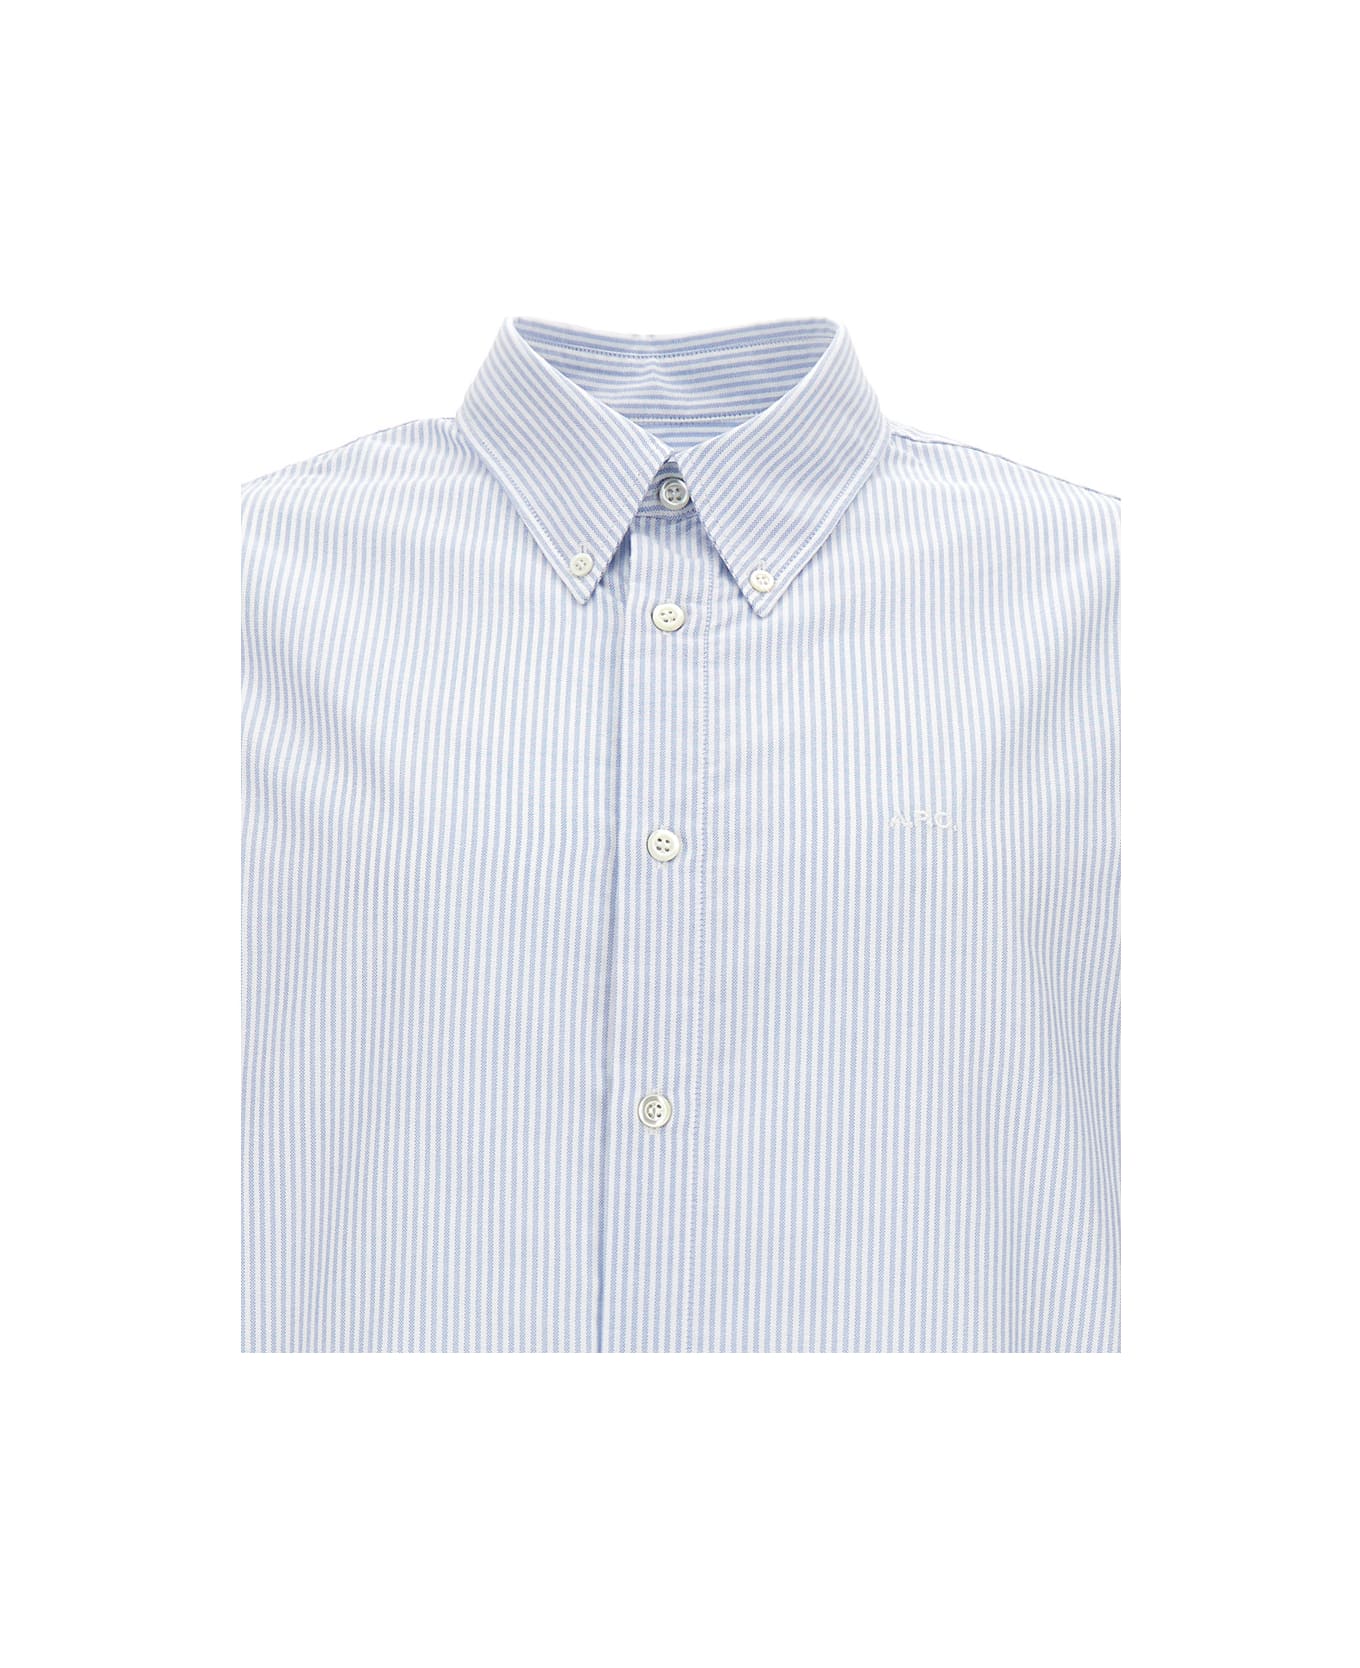 A.P.C. White Shirt With Blue Striped Pattern In Cotton Man - Bianco